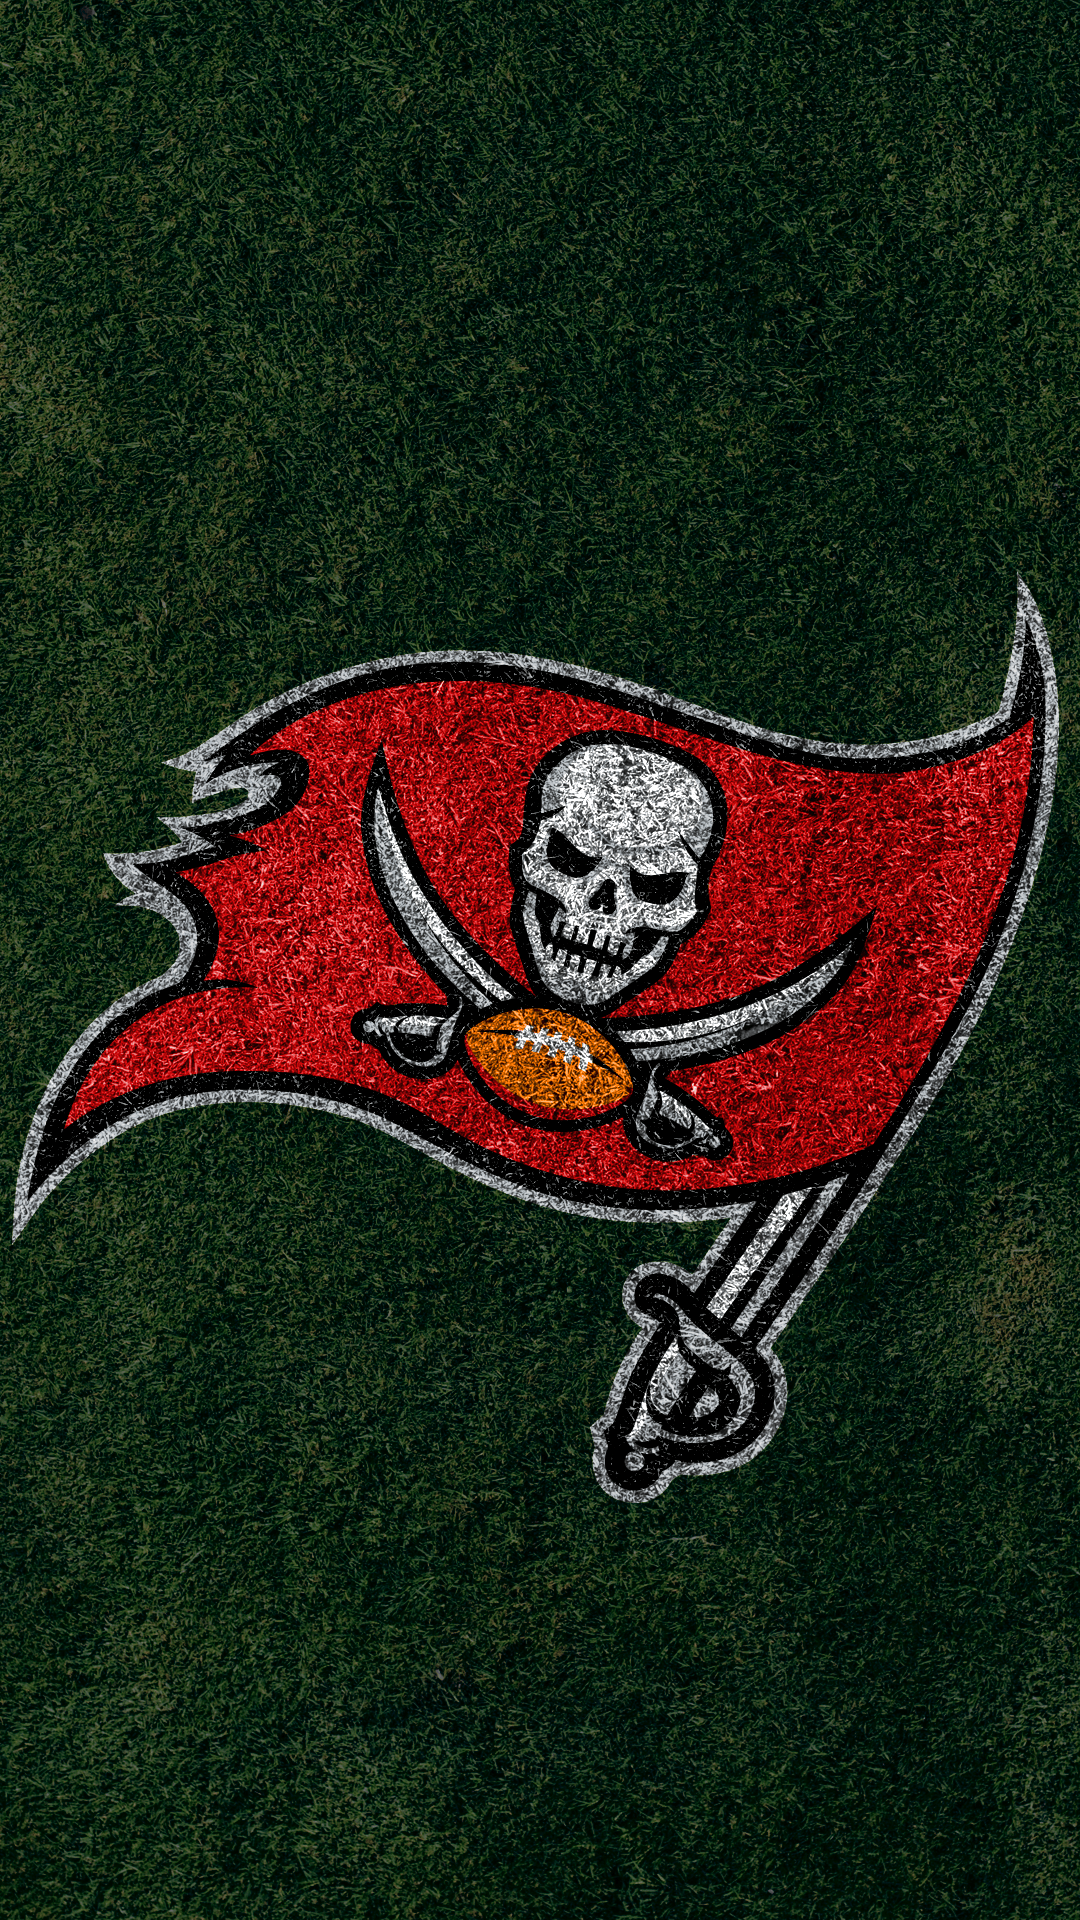 Tampa Bay Buccaneers Wallpaper. iPhone. Android